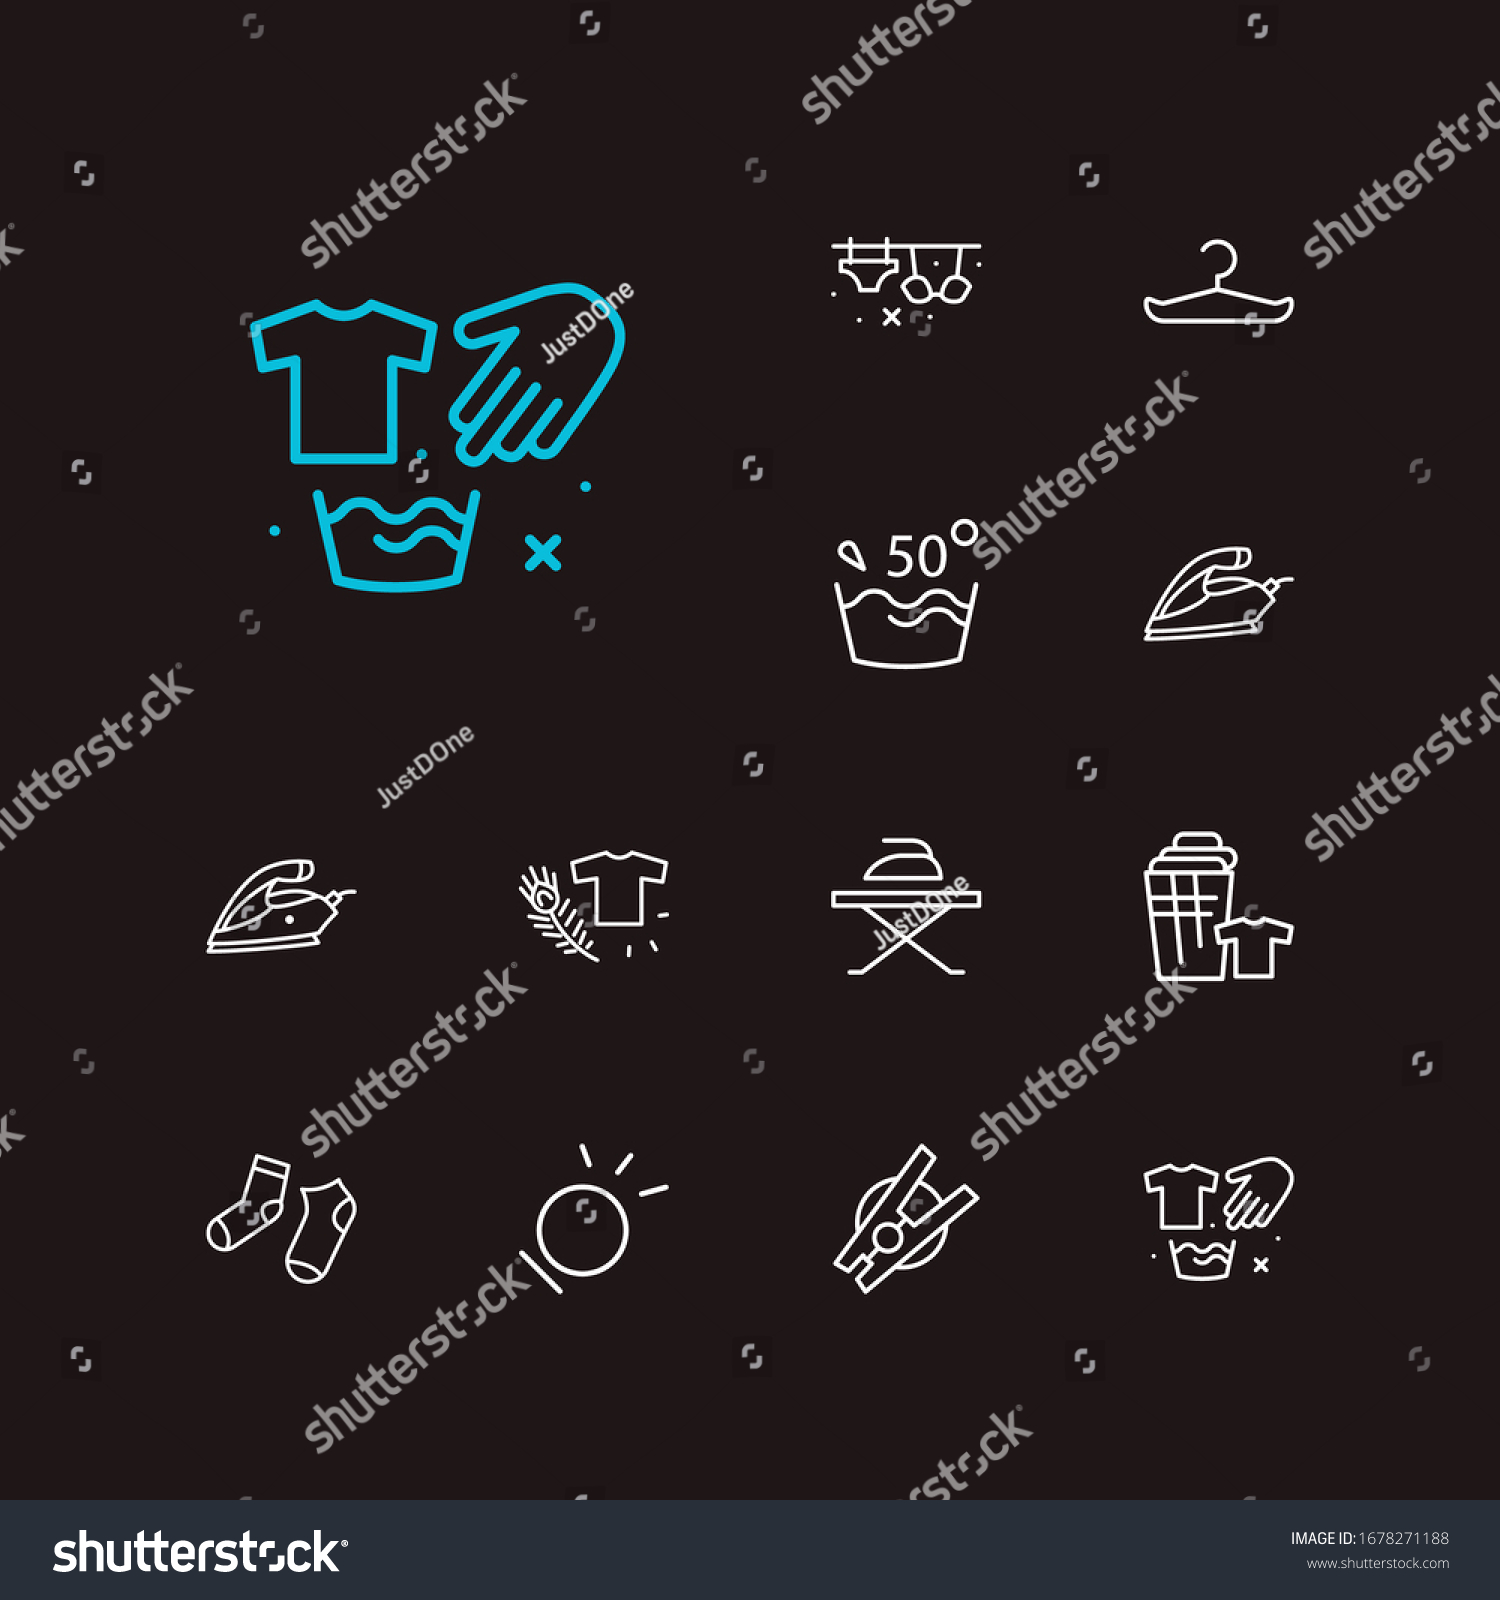 SVG of Laundry icons set. Water temperature 50 deg and laundry icons with hanger, different socks and t-shirt. Set of clear for web app logo UI design. svg